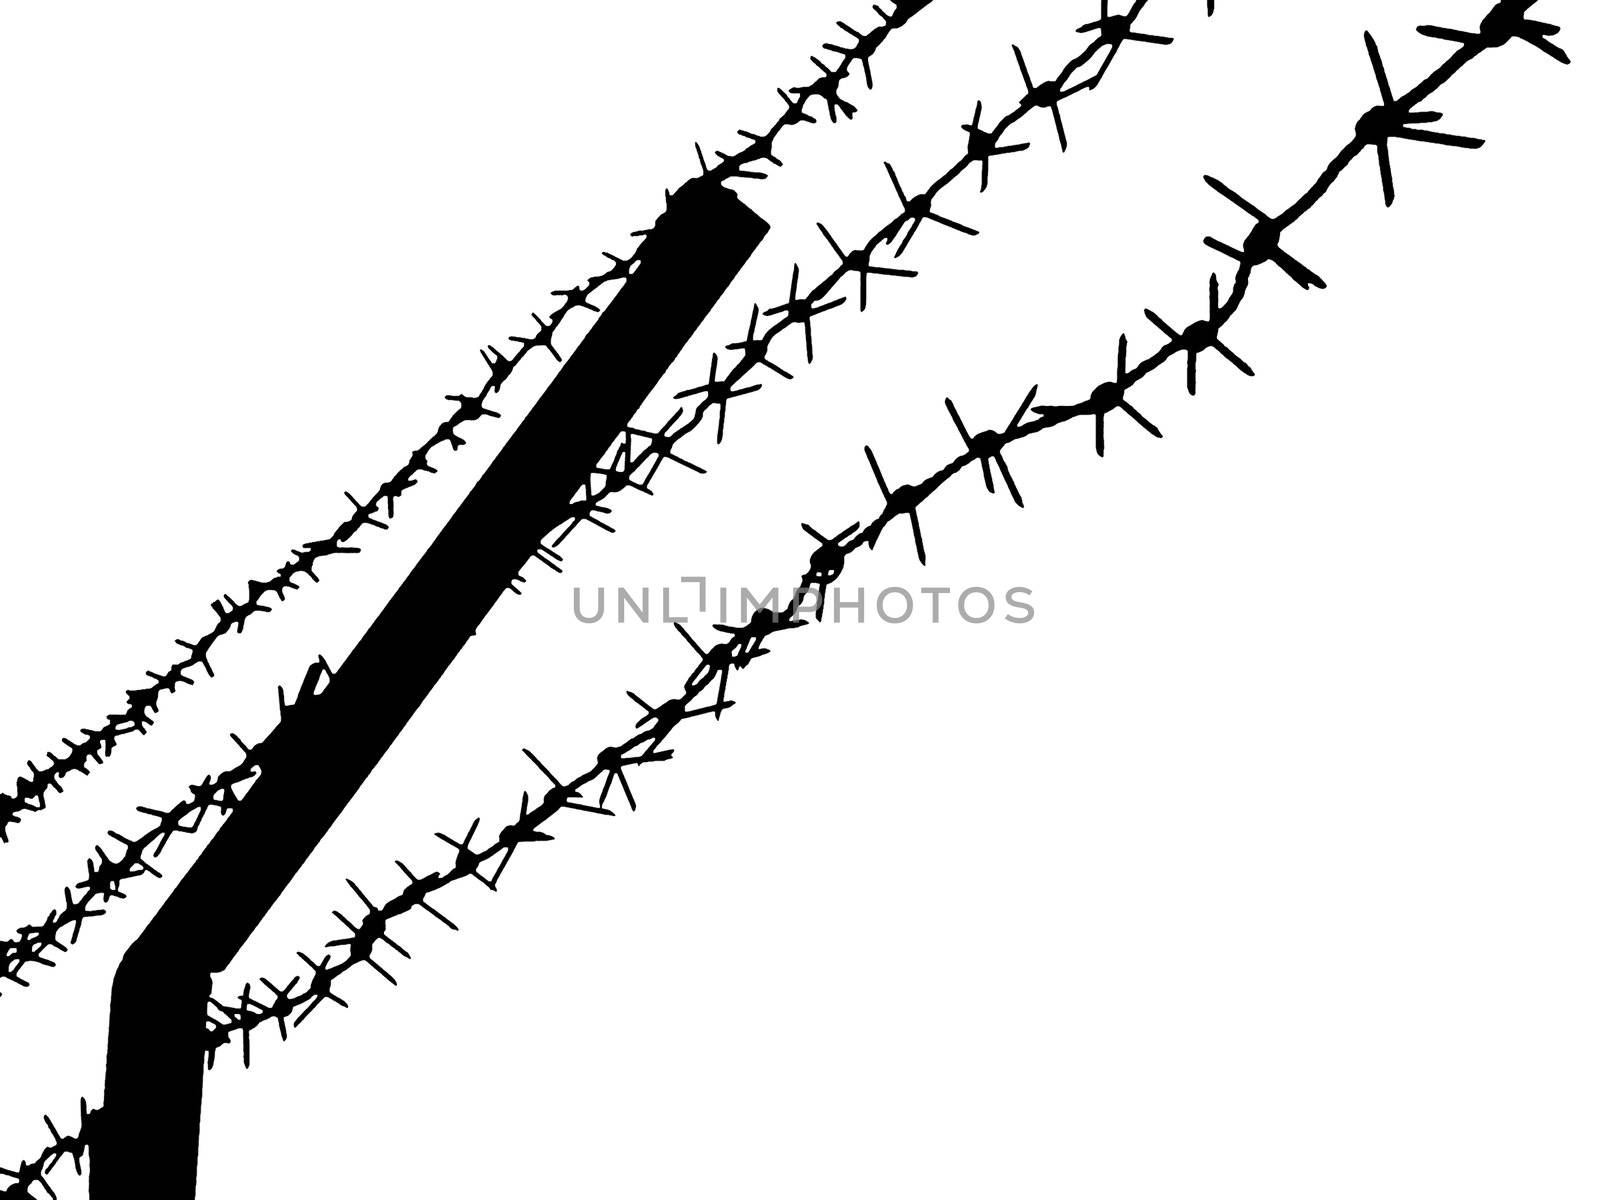 Barbed wire fence by ia_64